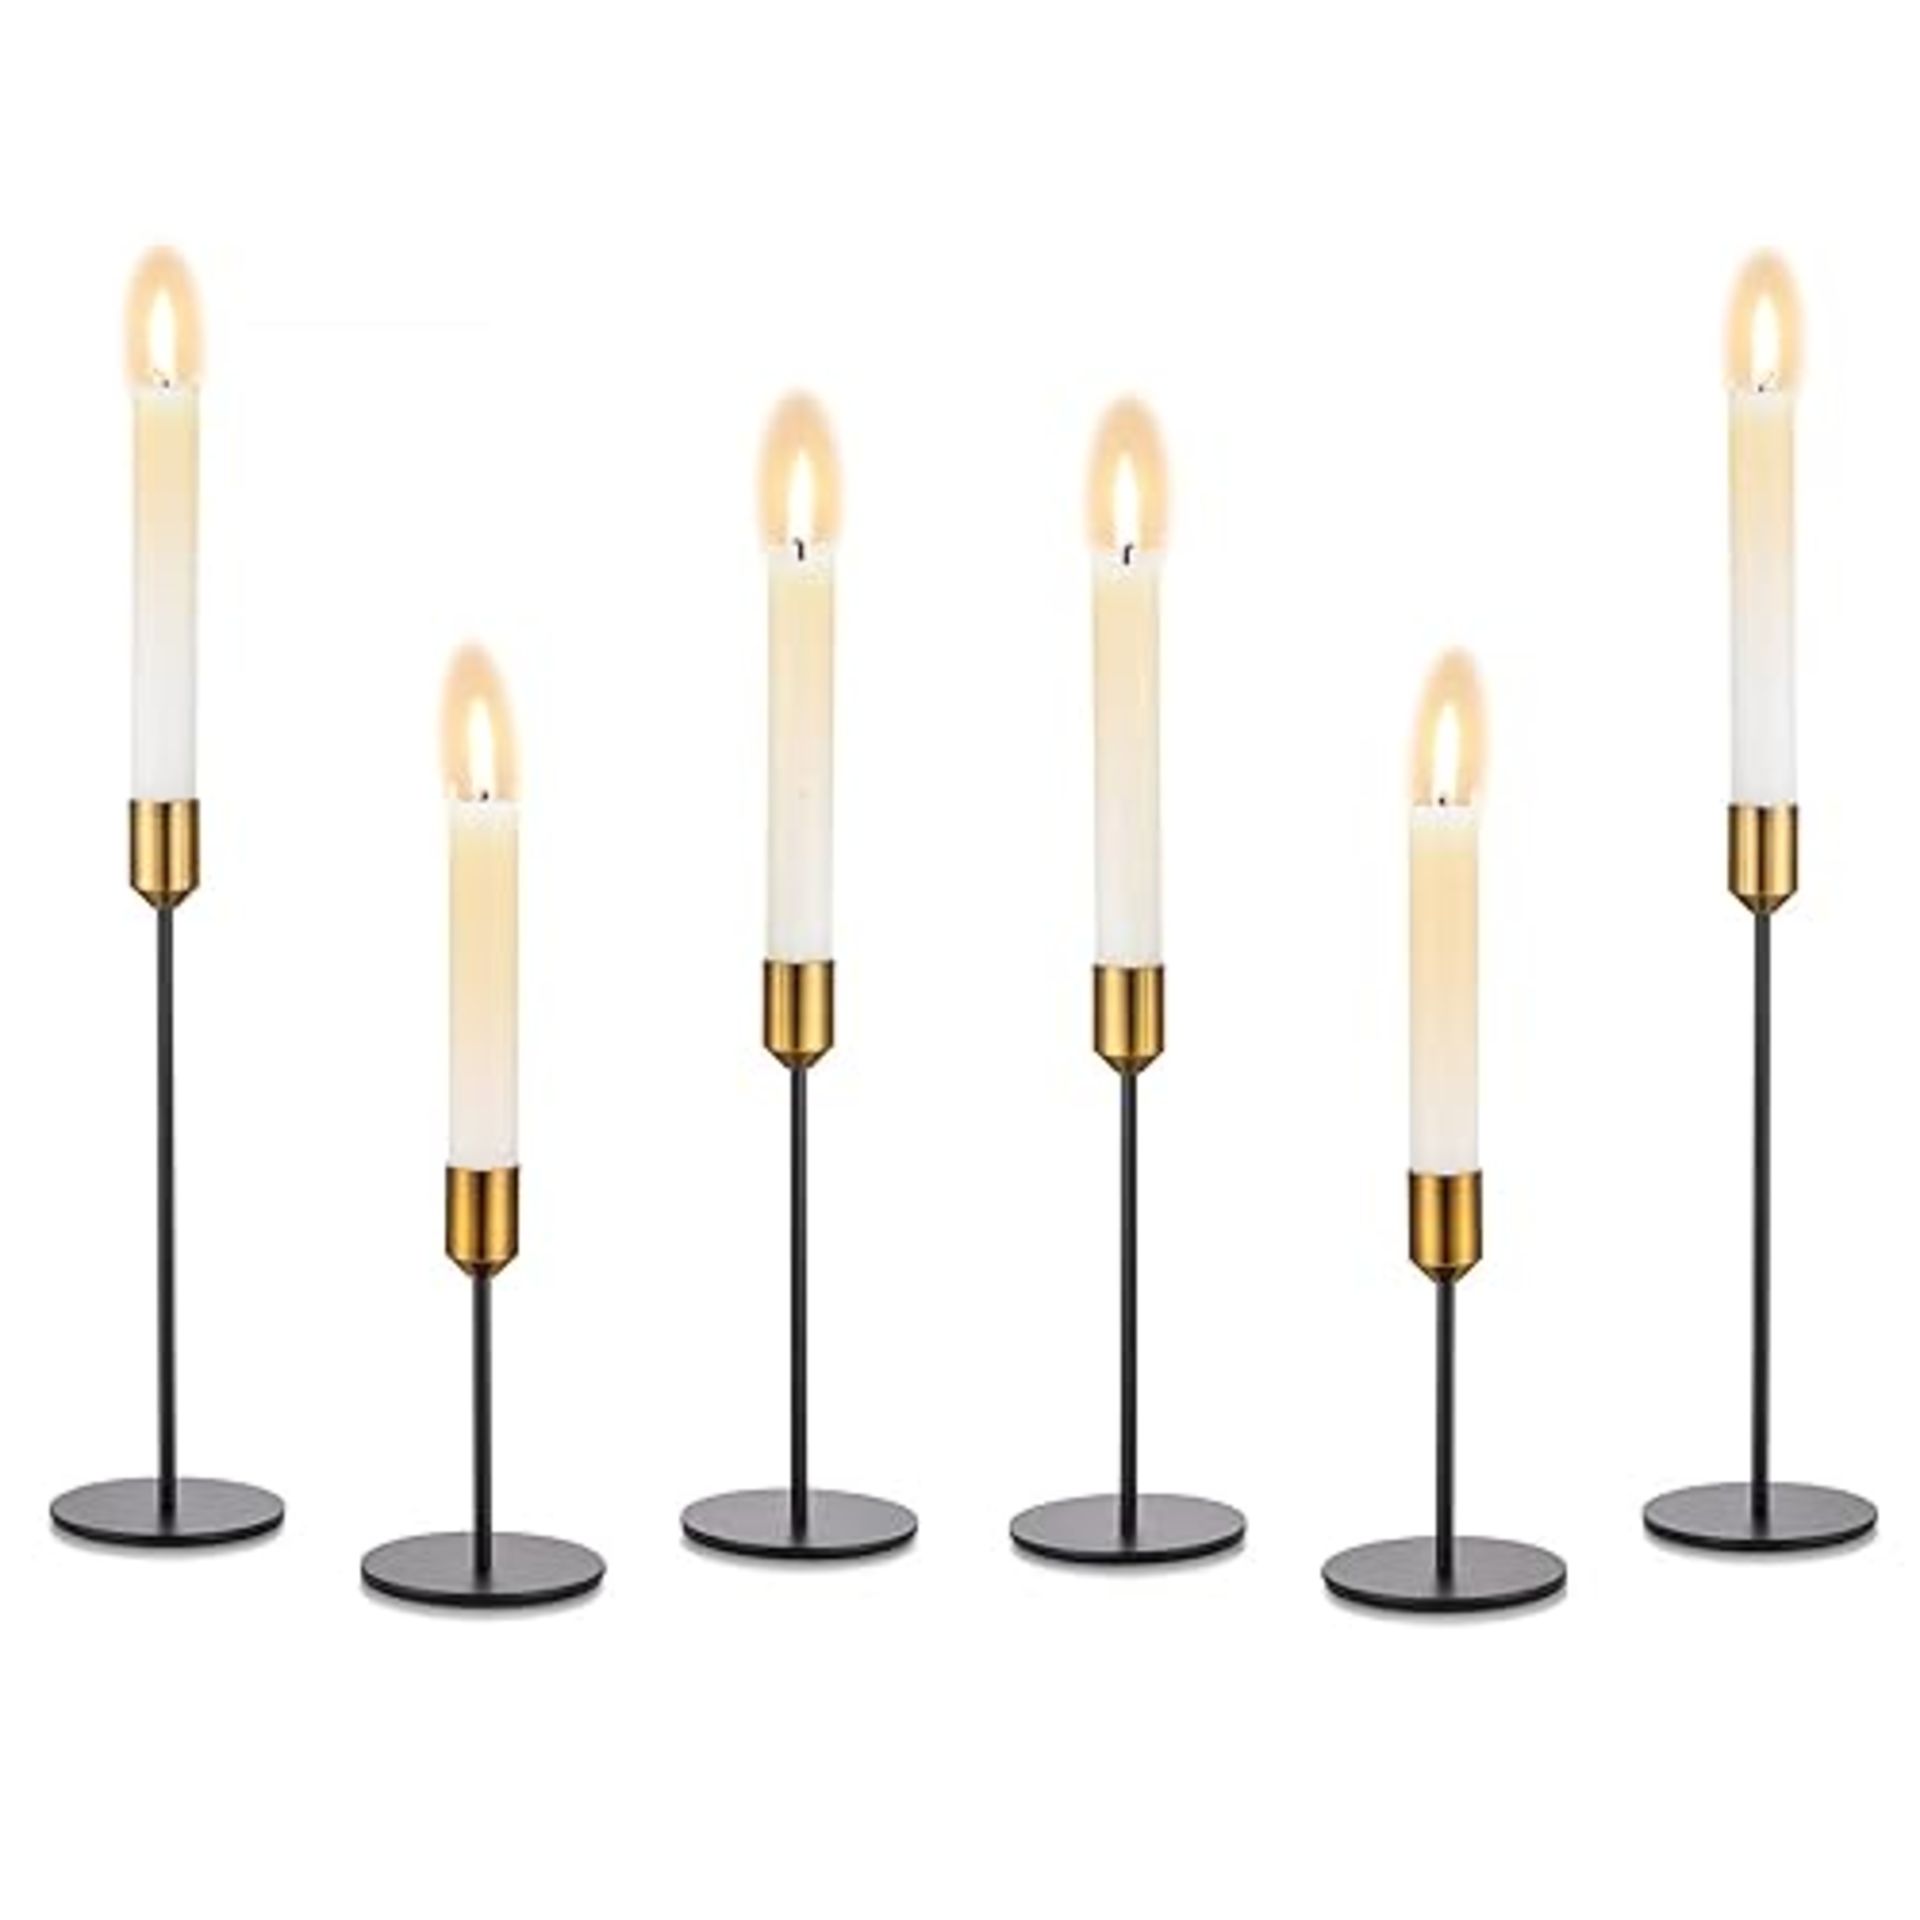 Candle Holders Taper Candle Holder - Set of 6 Black Candlestick Holders with Brass Top Candle Stick